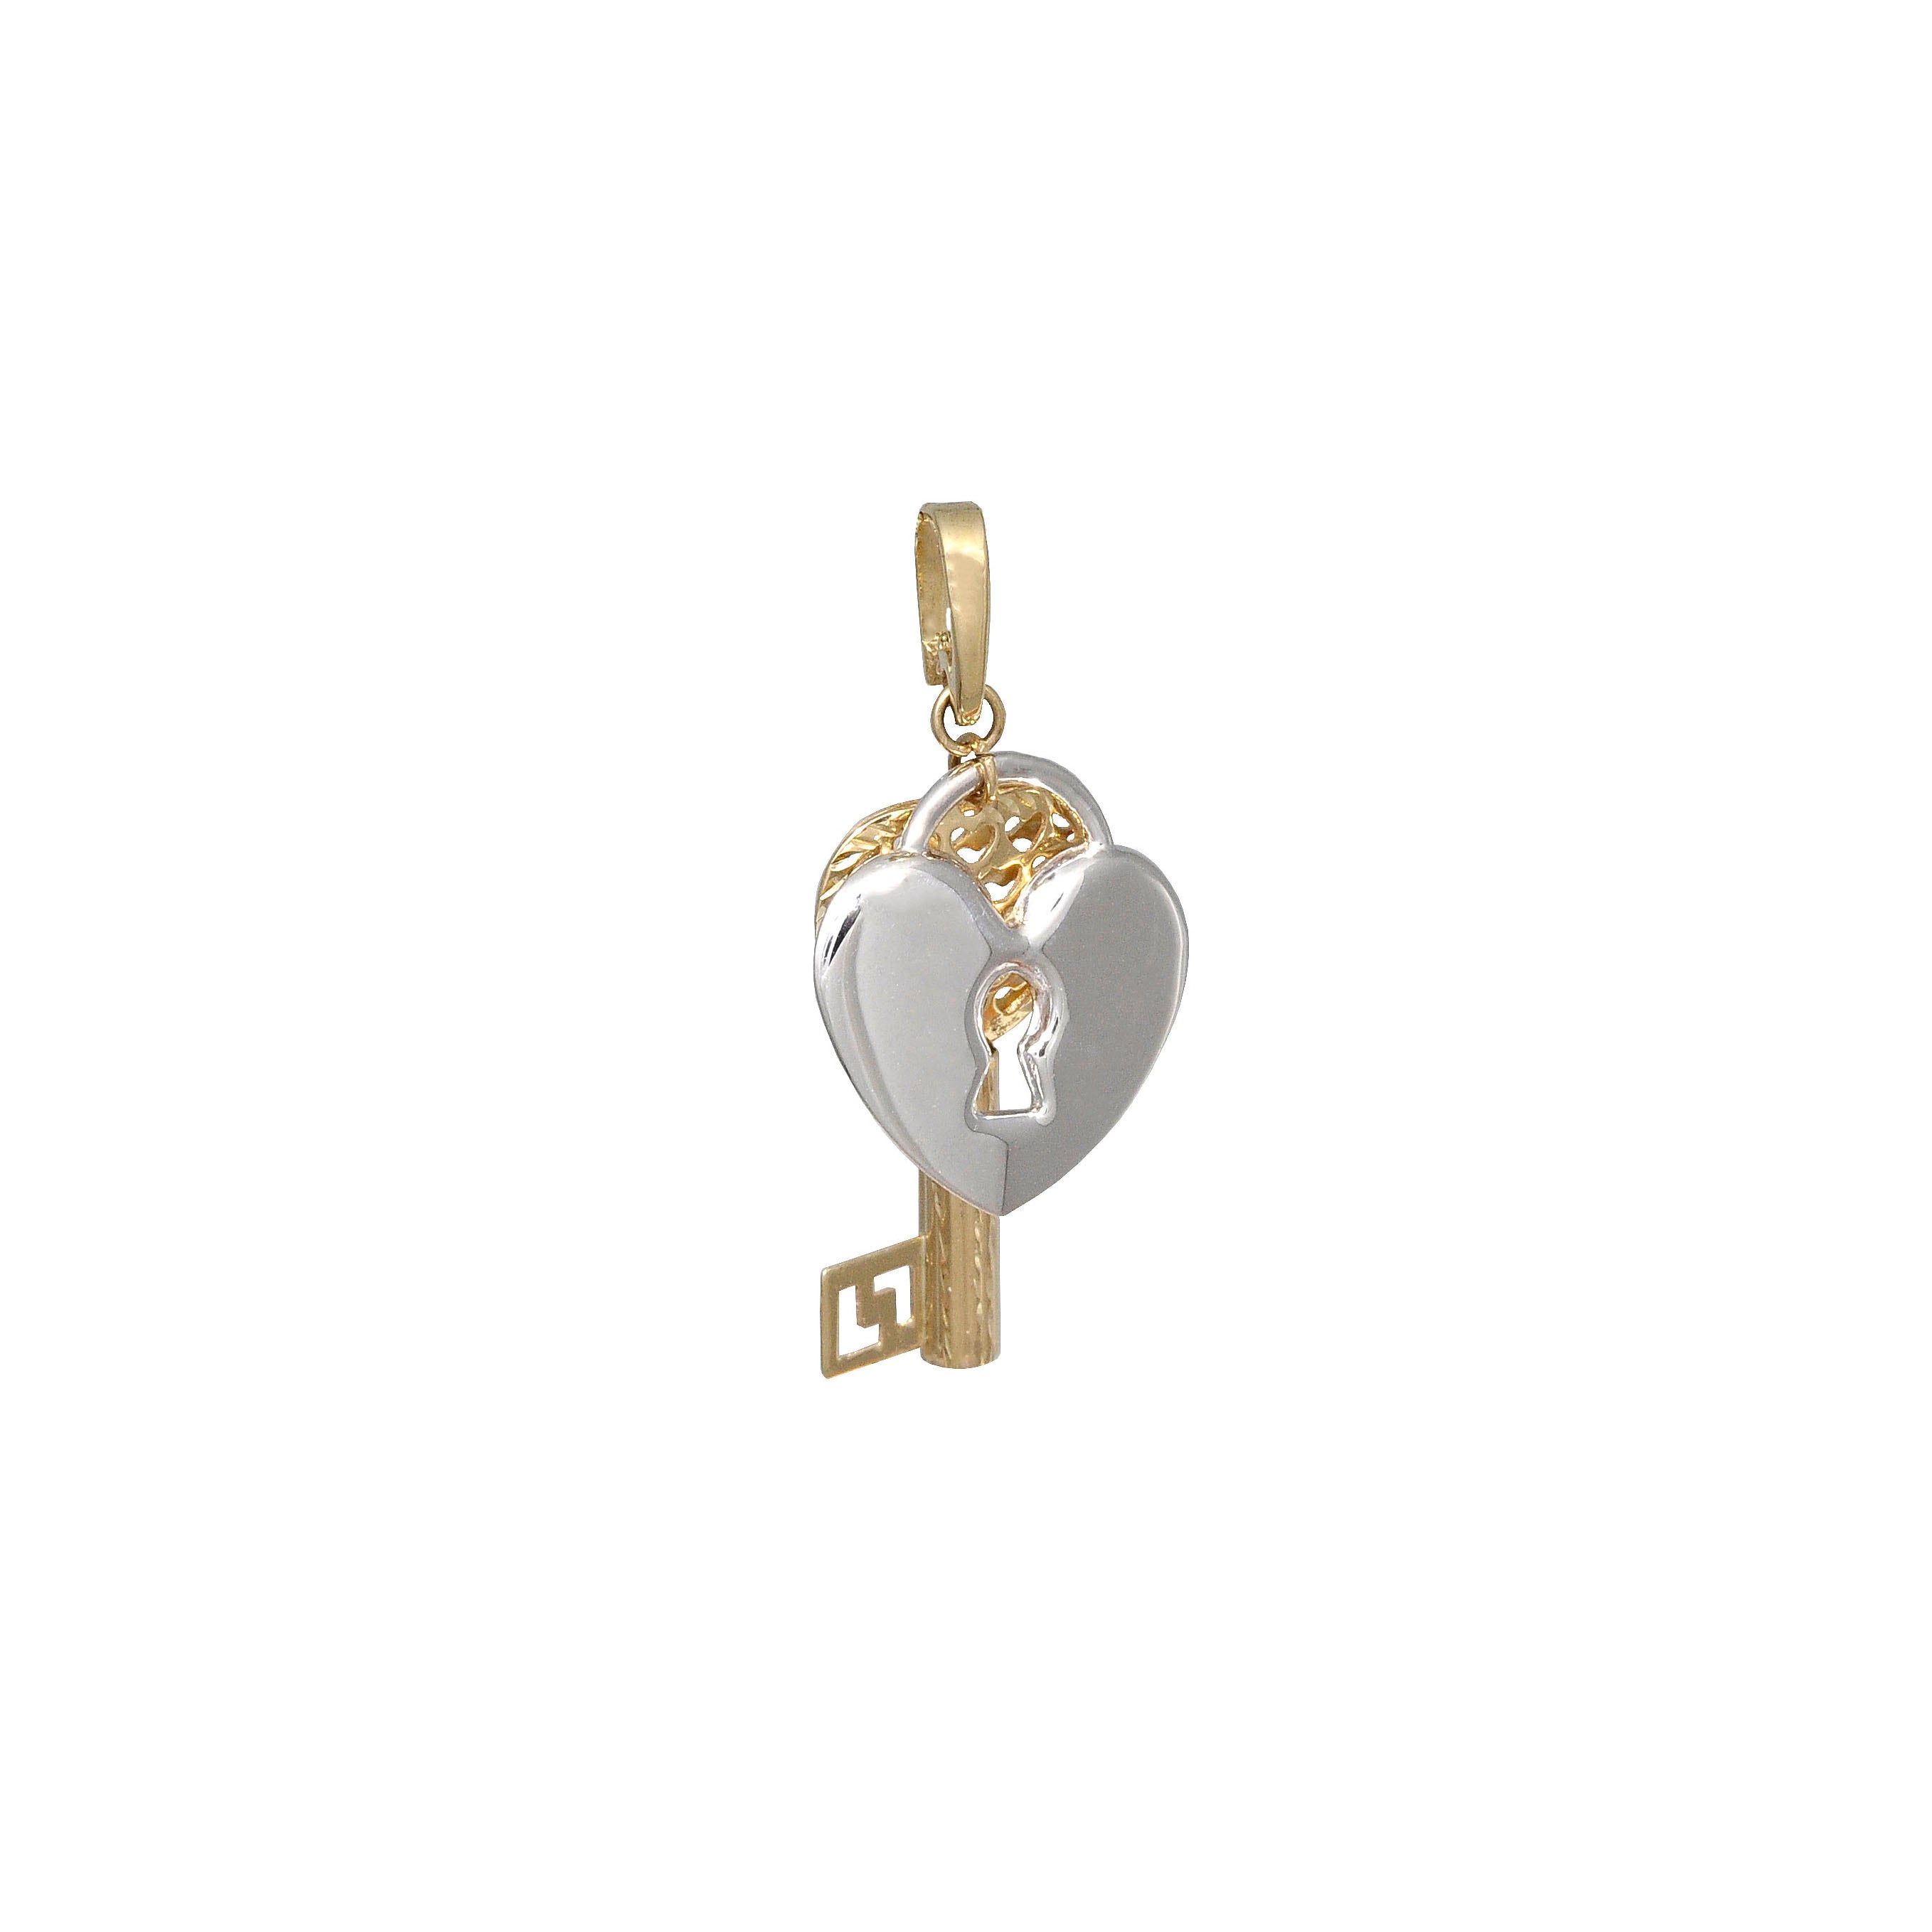 Key and heart pendant combined in  yellow and white 14K gold.